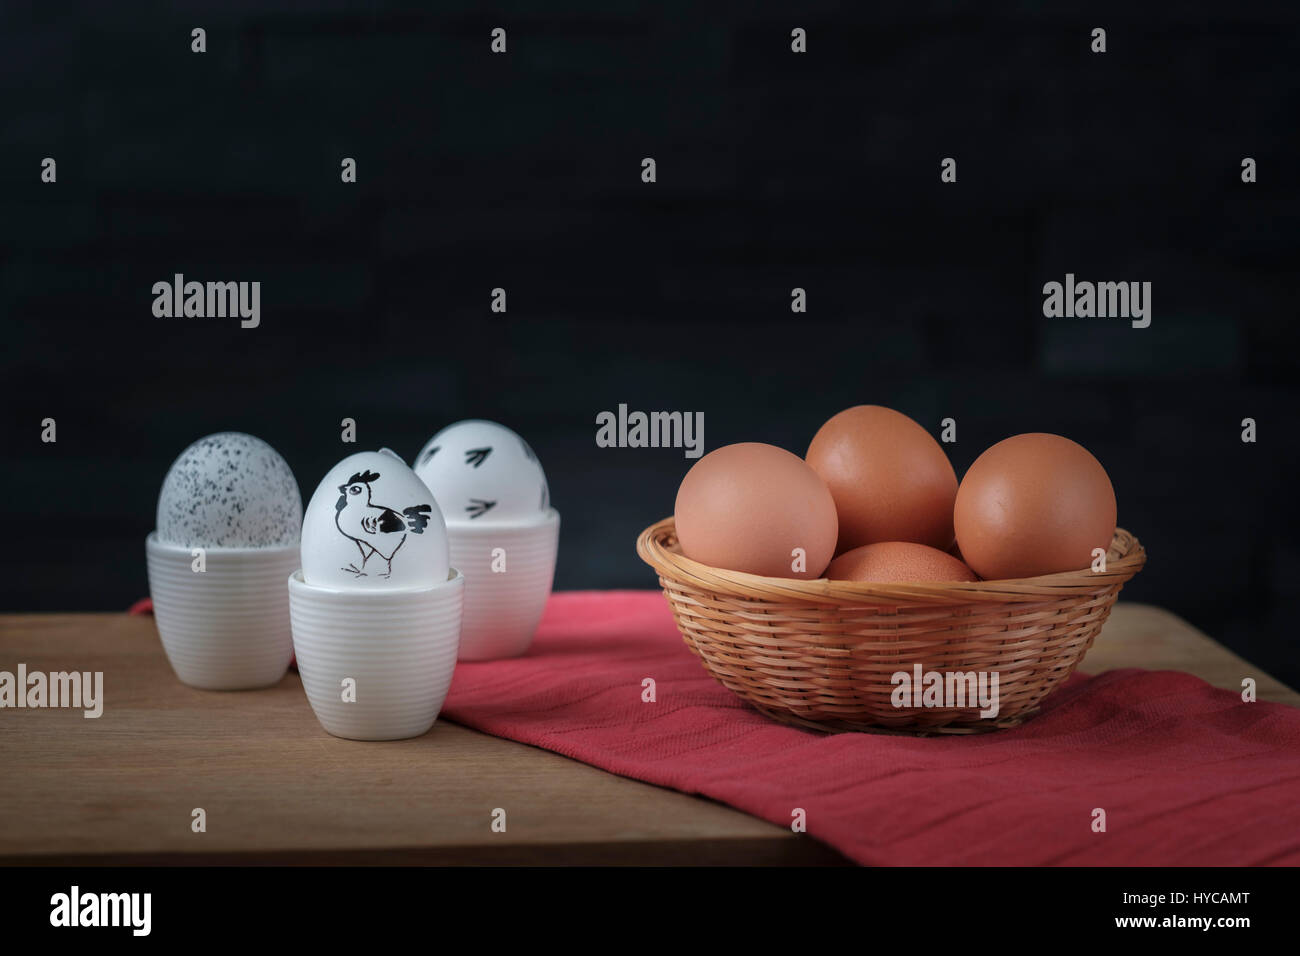 White easter eggs in an egg cup and brown eggs in a wicker basket on a red towel and a wooden plank Stock Photo